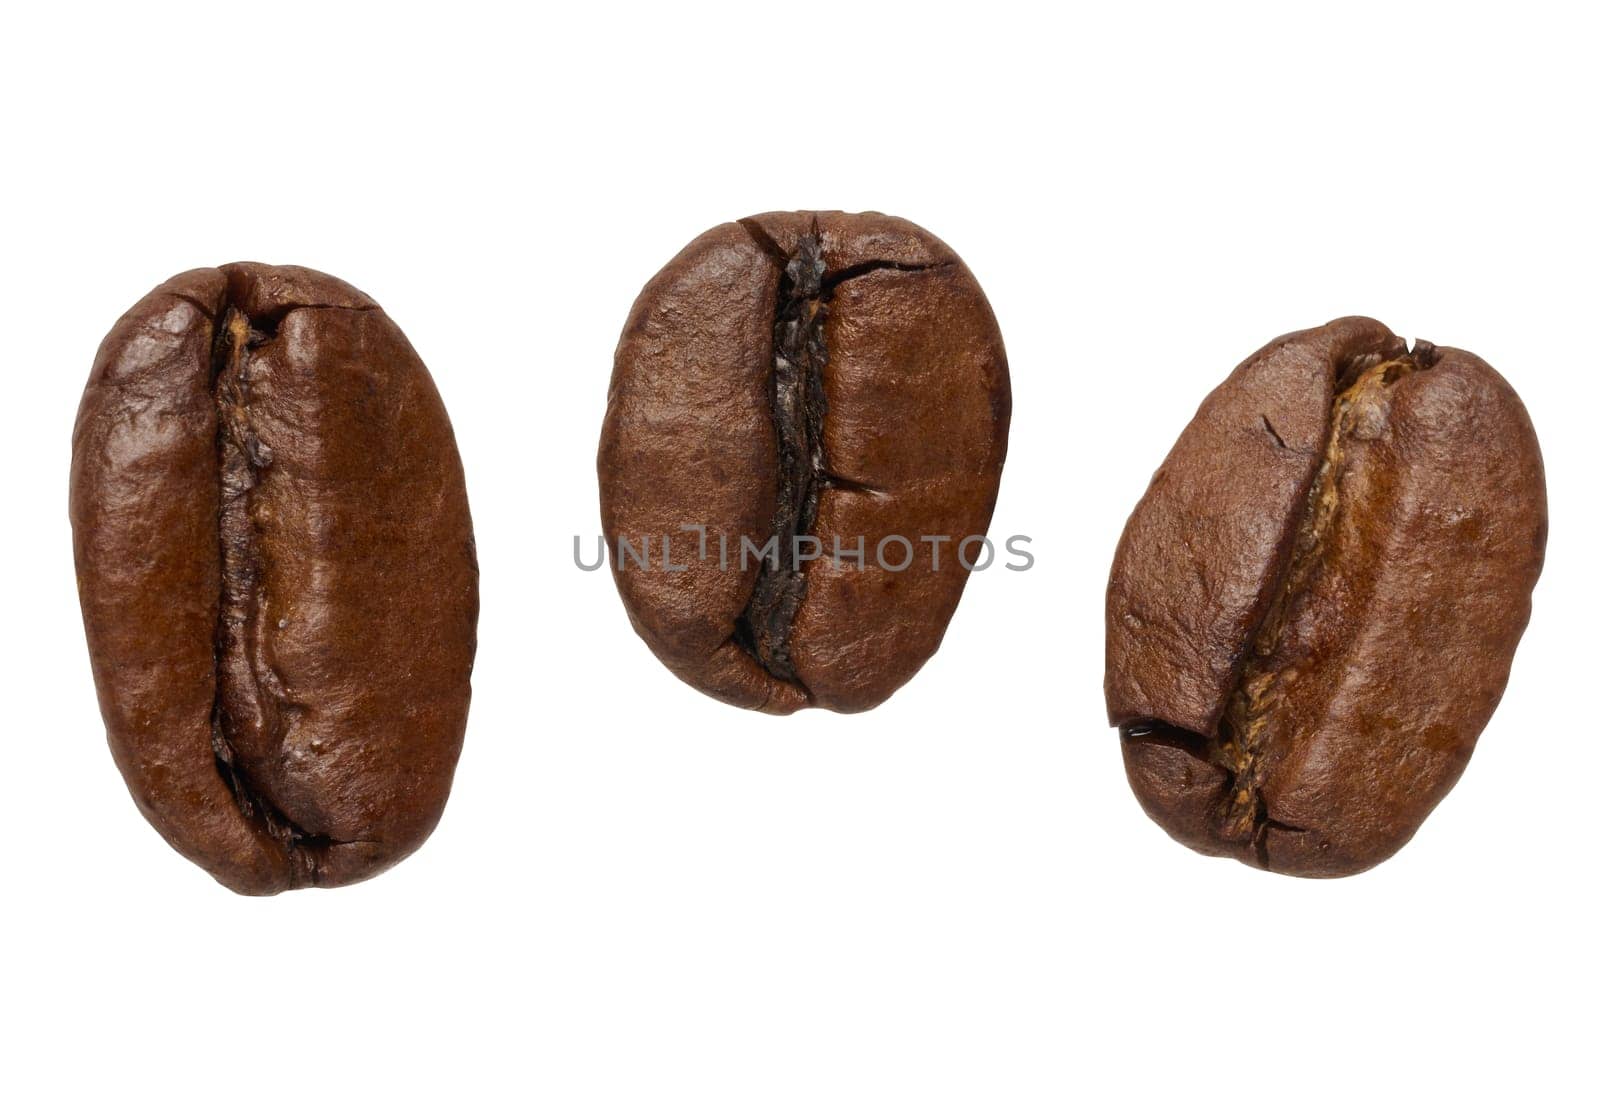 Roasted coffee beans scattered on isolated background by ndanko